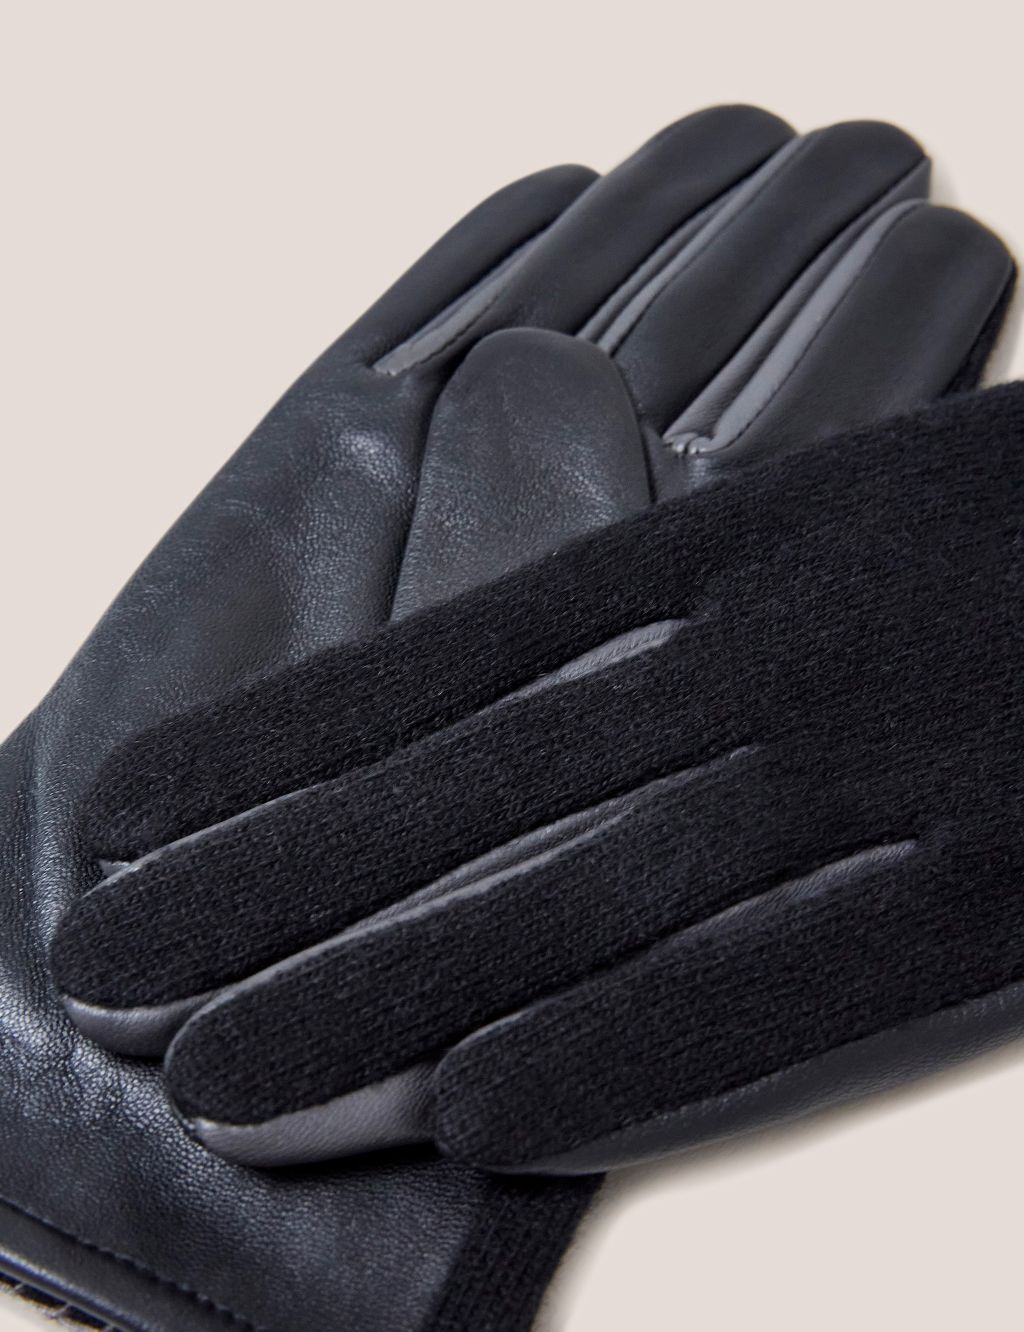 Leather Knitted Stitch Detail Gloves | White Stuff | M&S